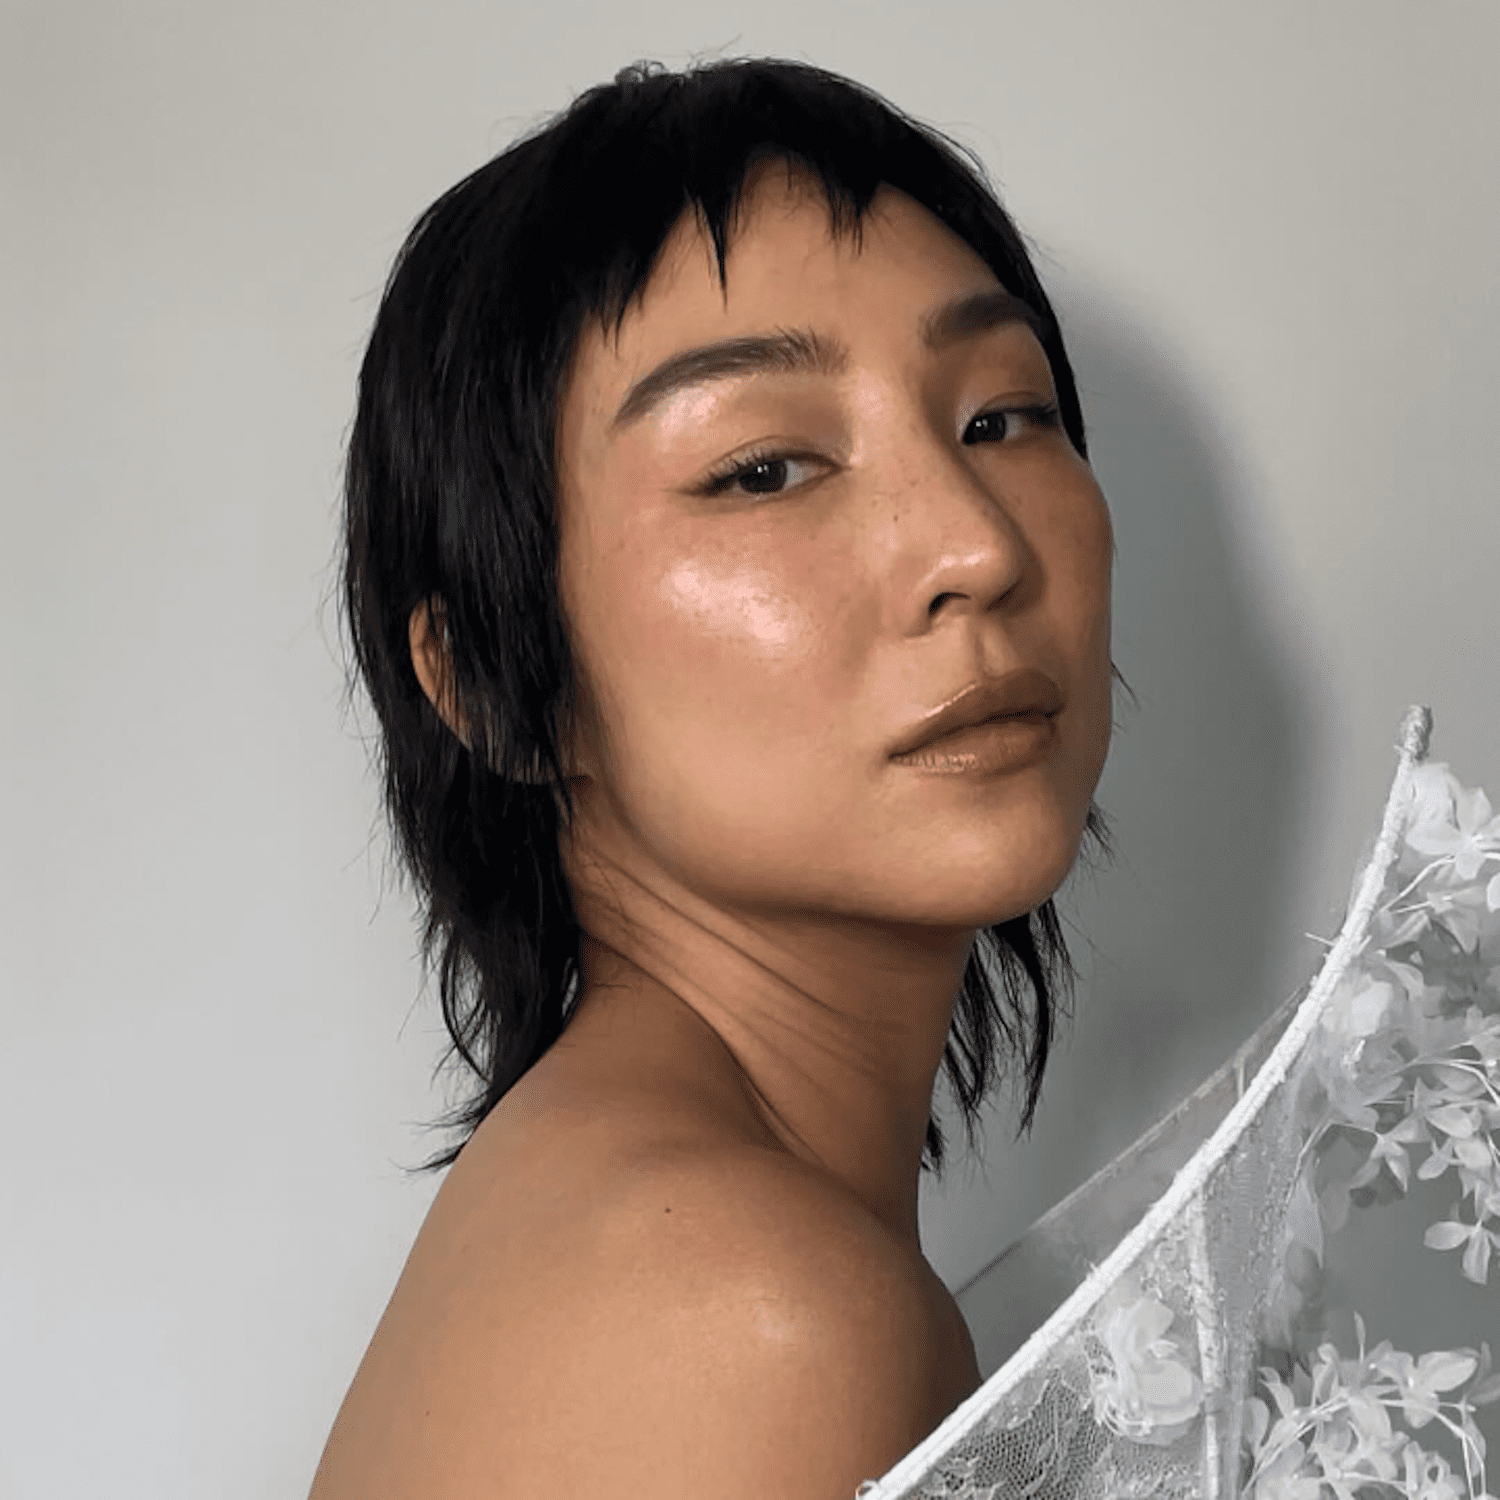 Greta Lee attends the Met Gala with a choppy mullet